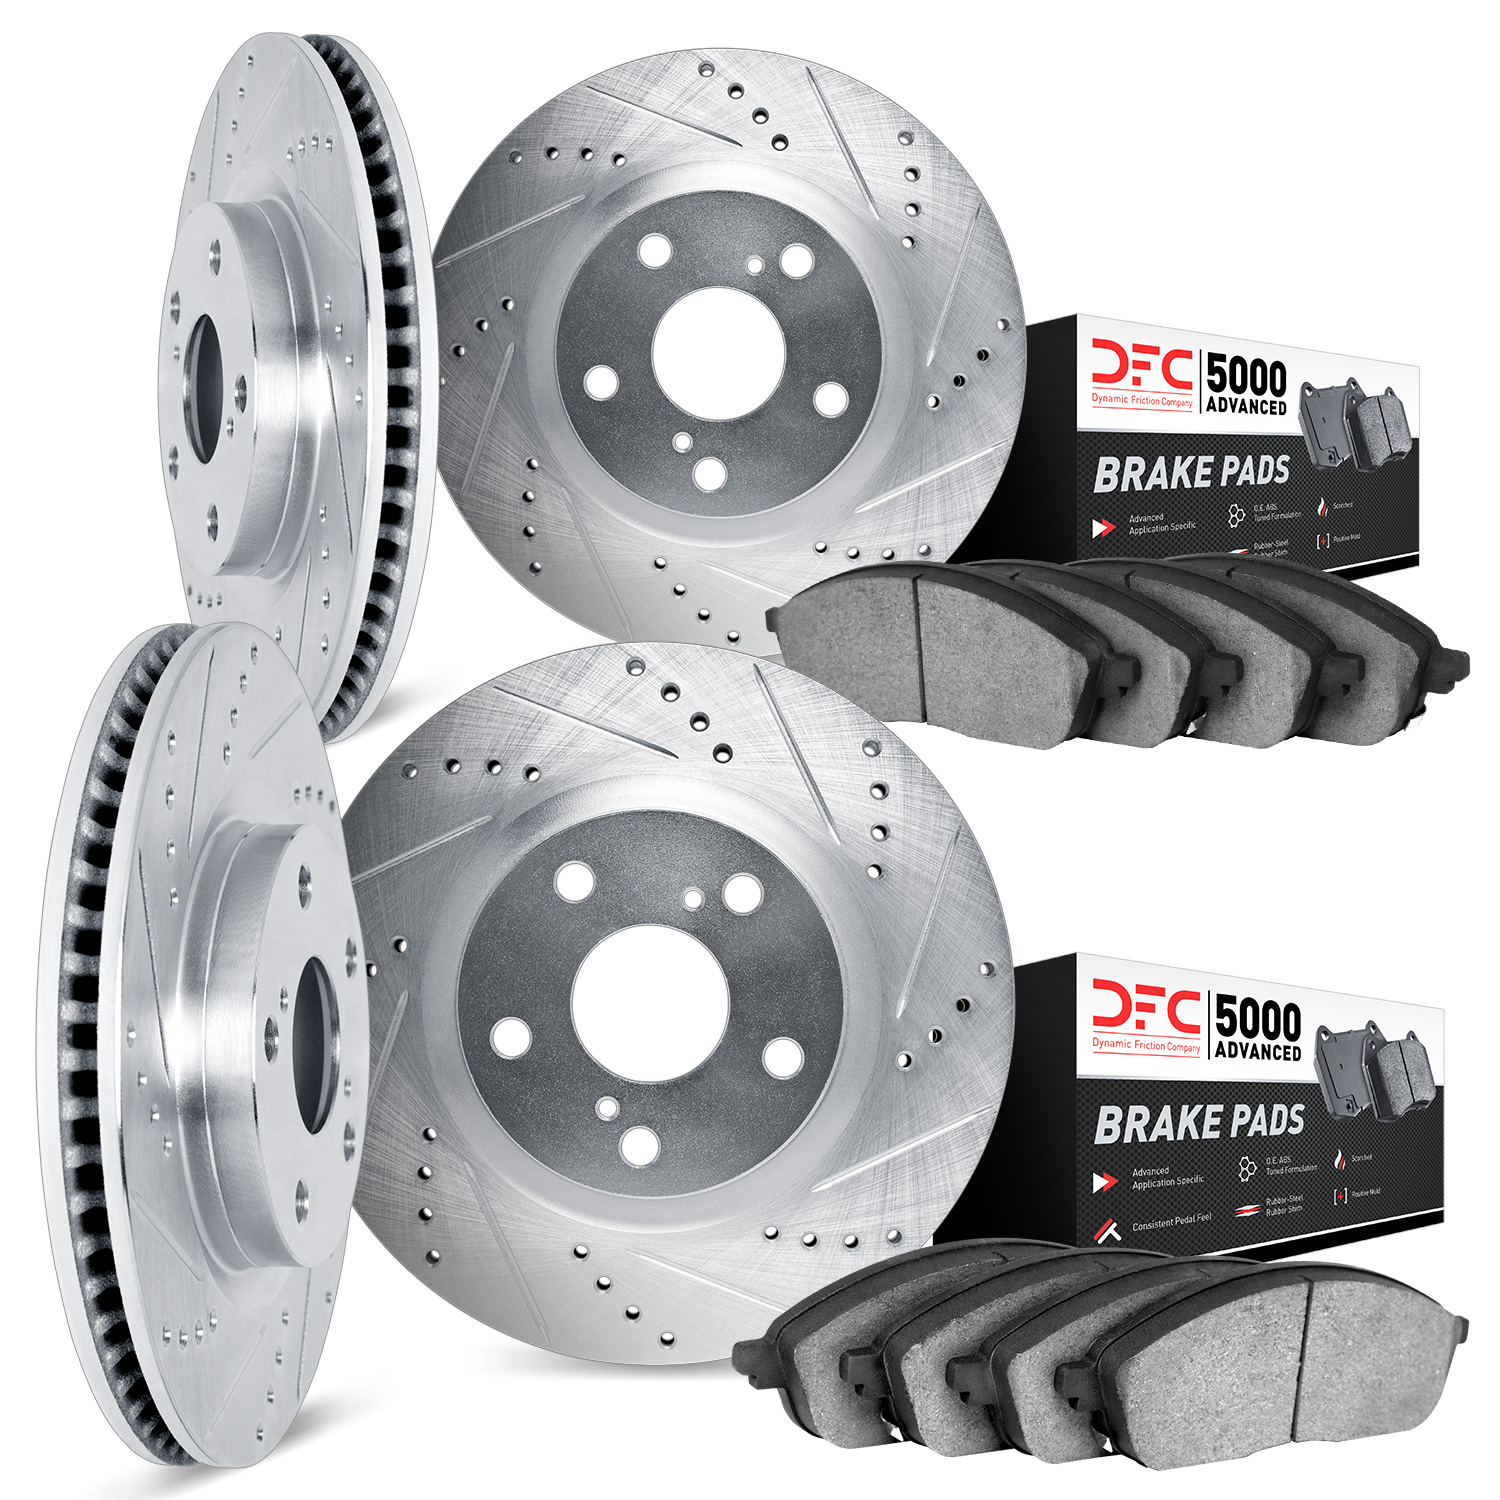 7504-42053 Drilled/Slotted Brake Rotors w/5000 Advanced Brake Pads Kit [Silver], Fits Select Mopar, Position: Front and Rear